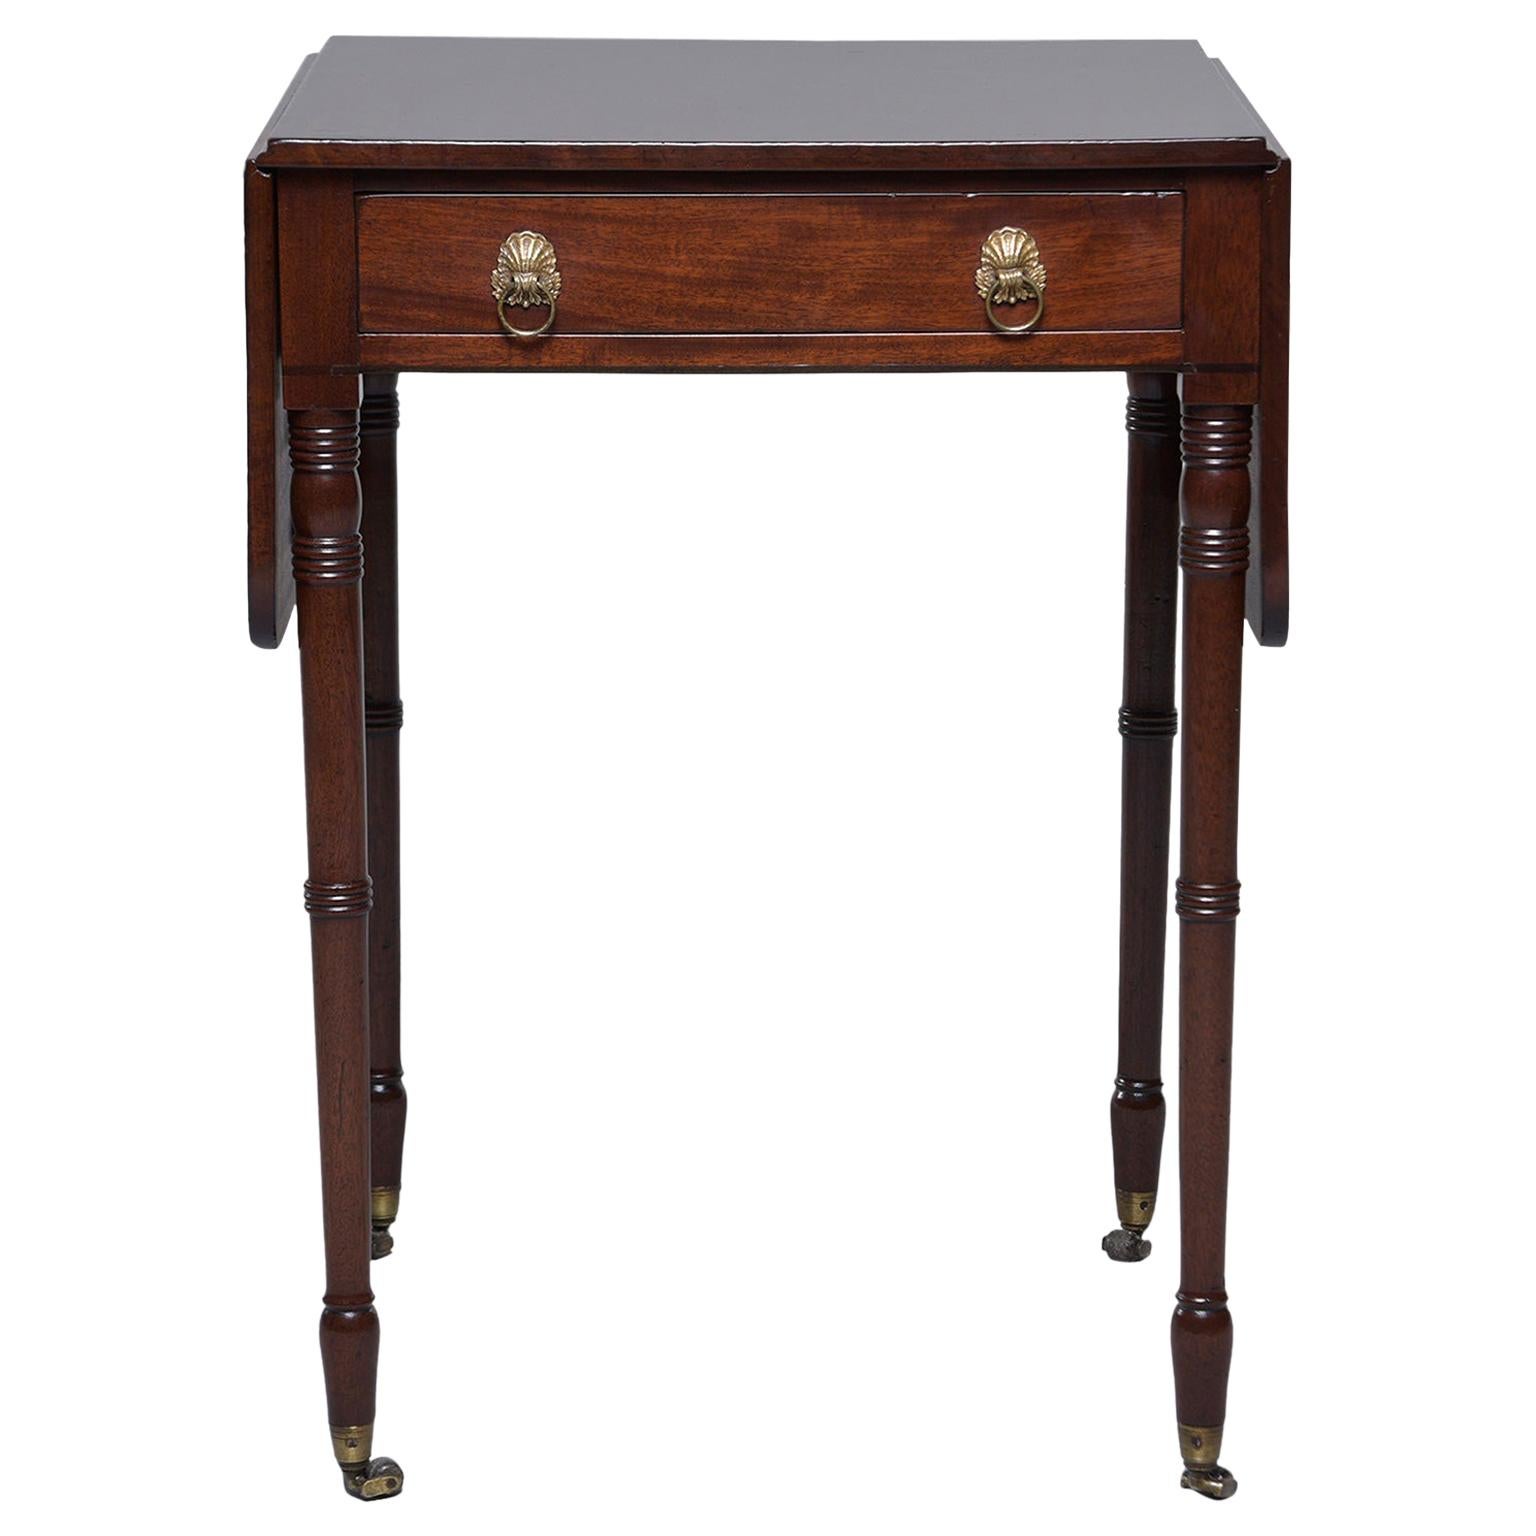 Mahogany Pembroke Table with Original Brass Casters